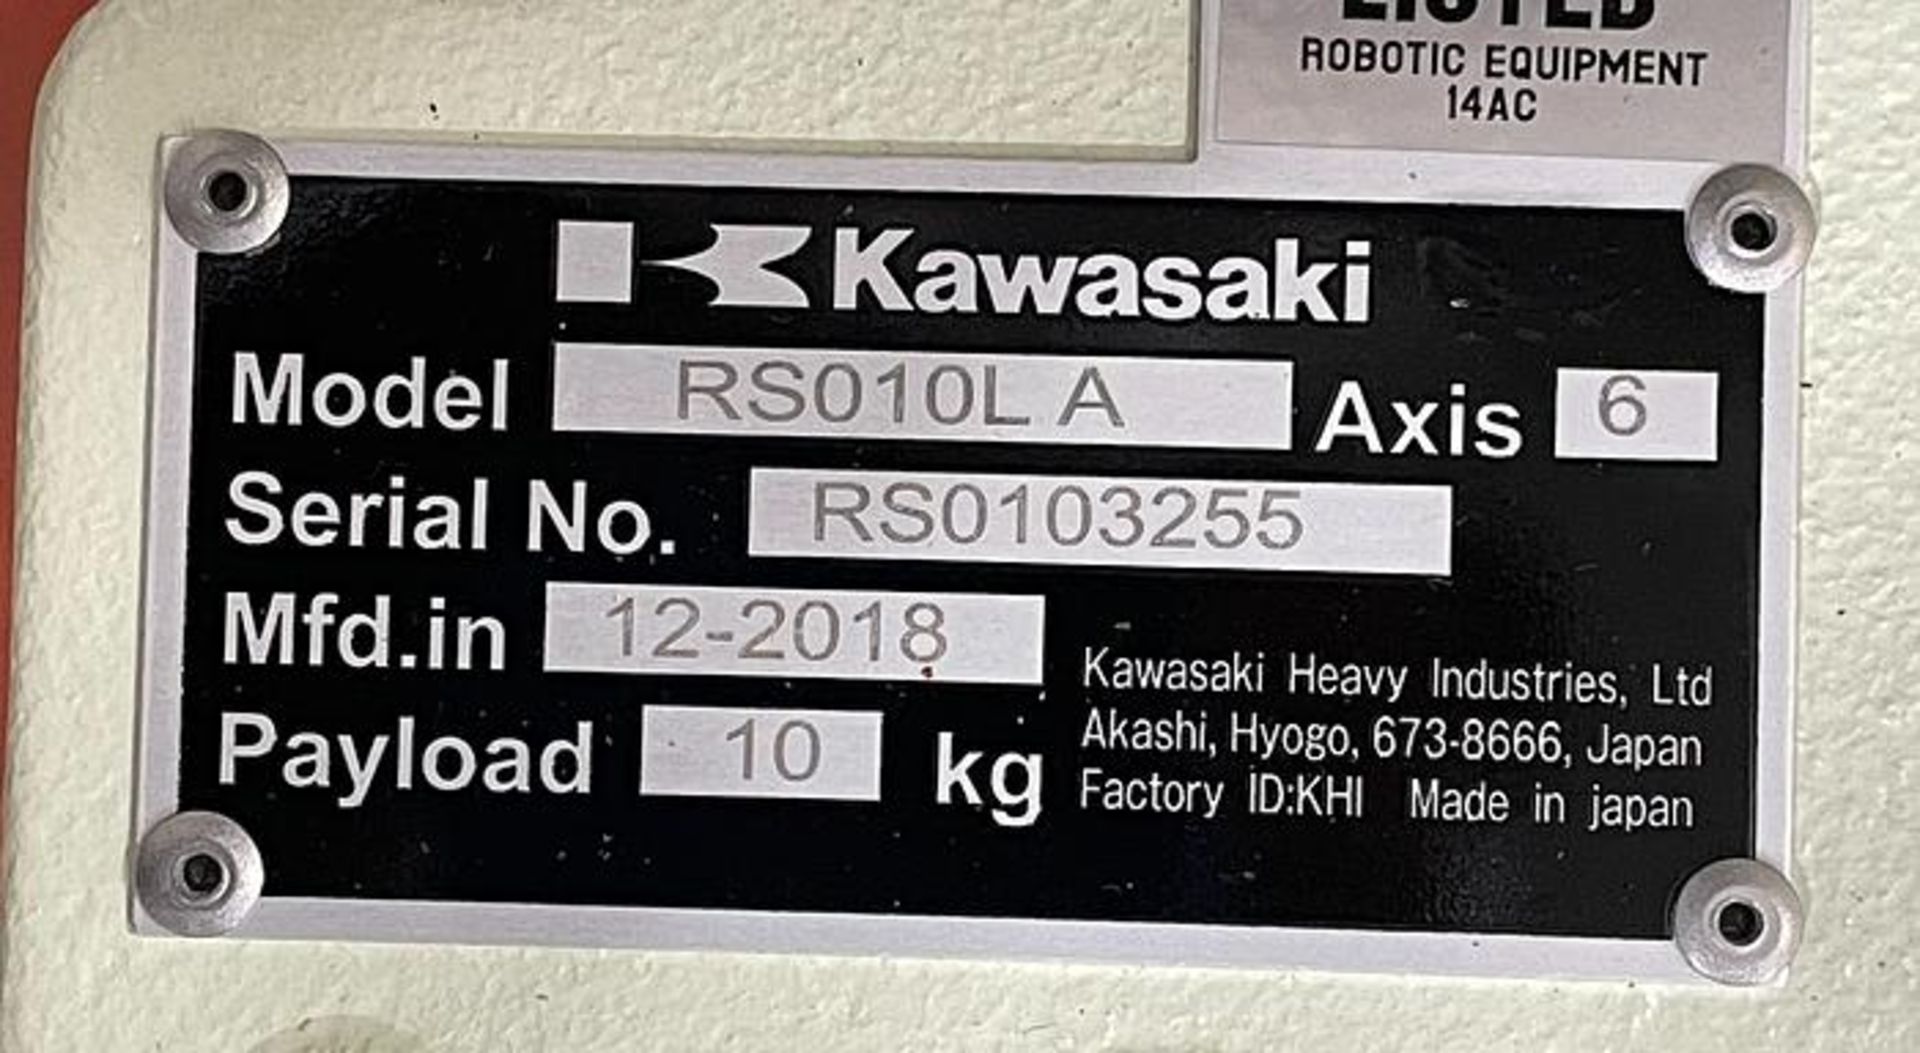 KAWASAKI ROBOT MODEL RS010L WITH E01 CONTROLLER, 10KG X 1925mm REACH, CABLES, TEACH & RISER (NEW) - Image 2 of 5